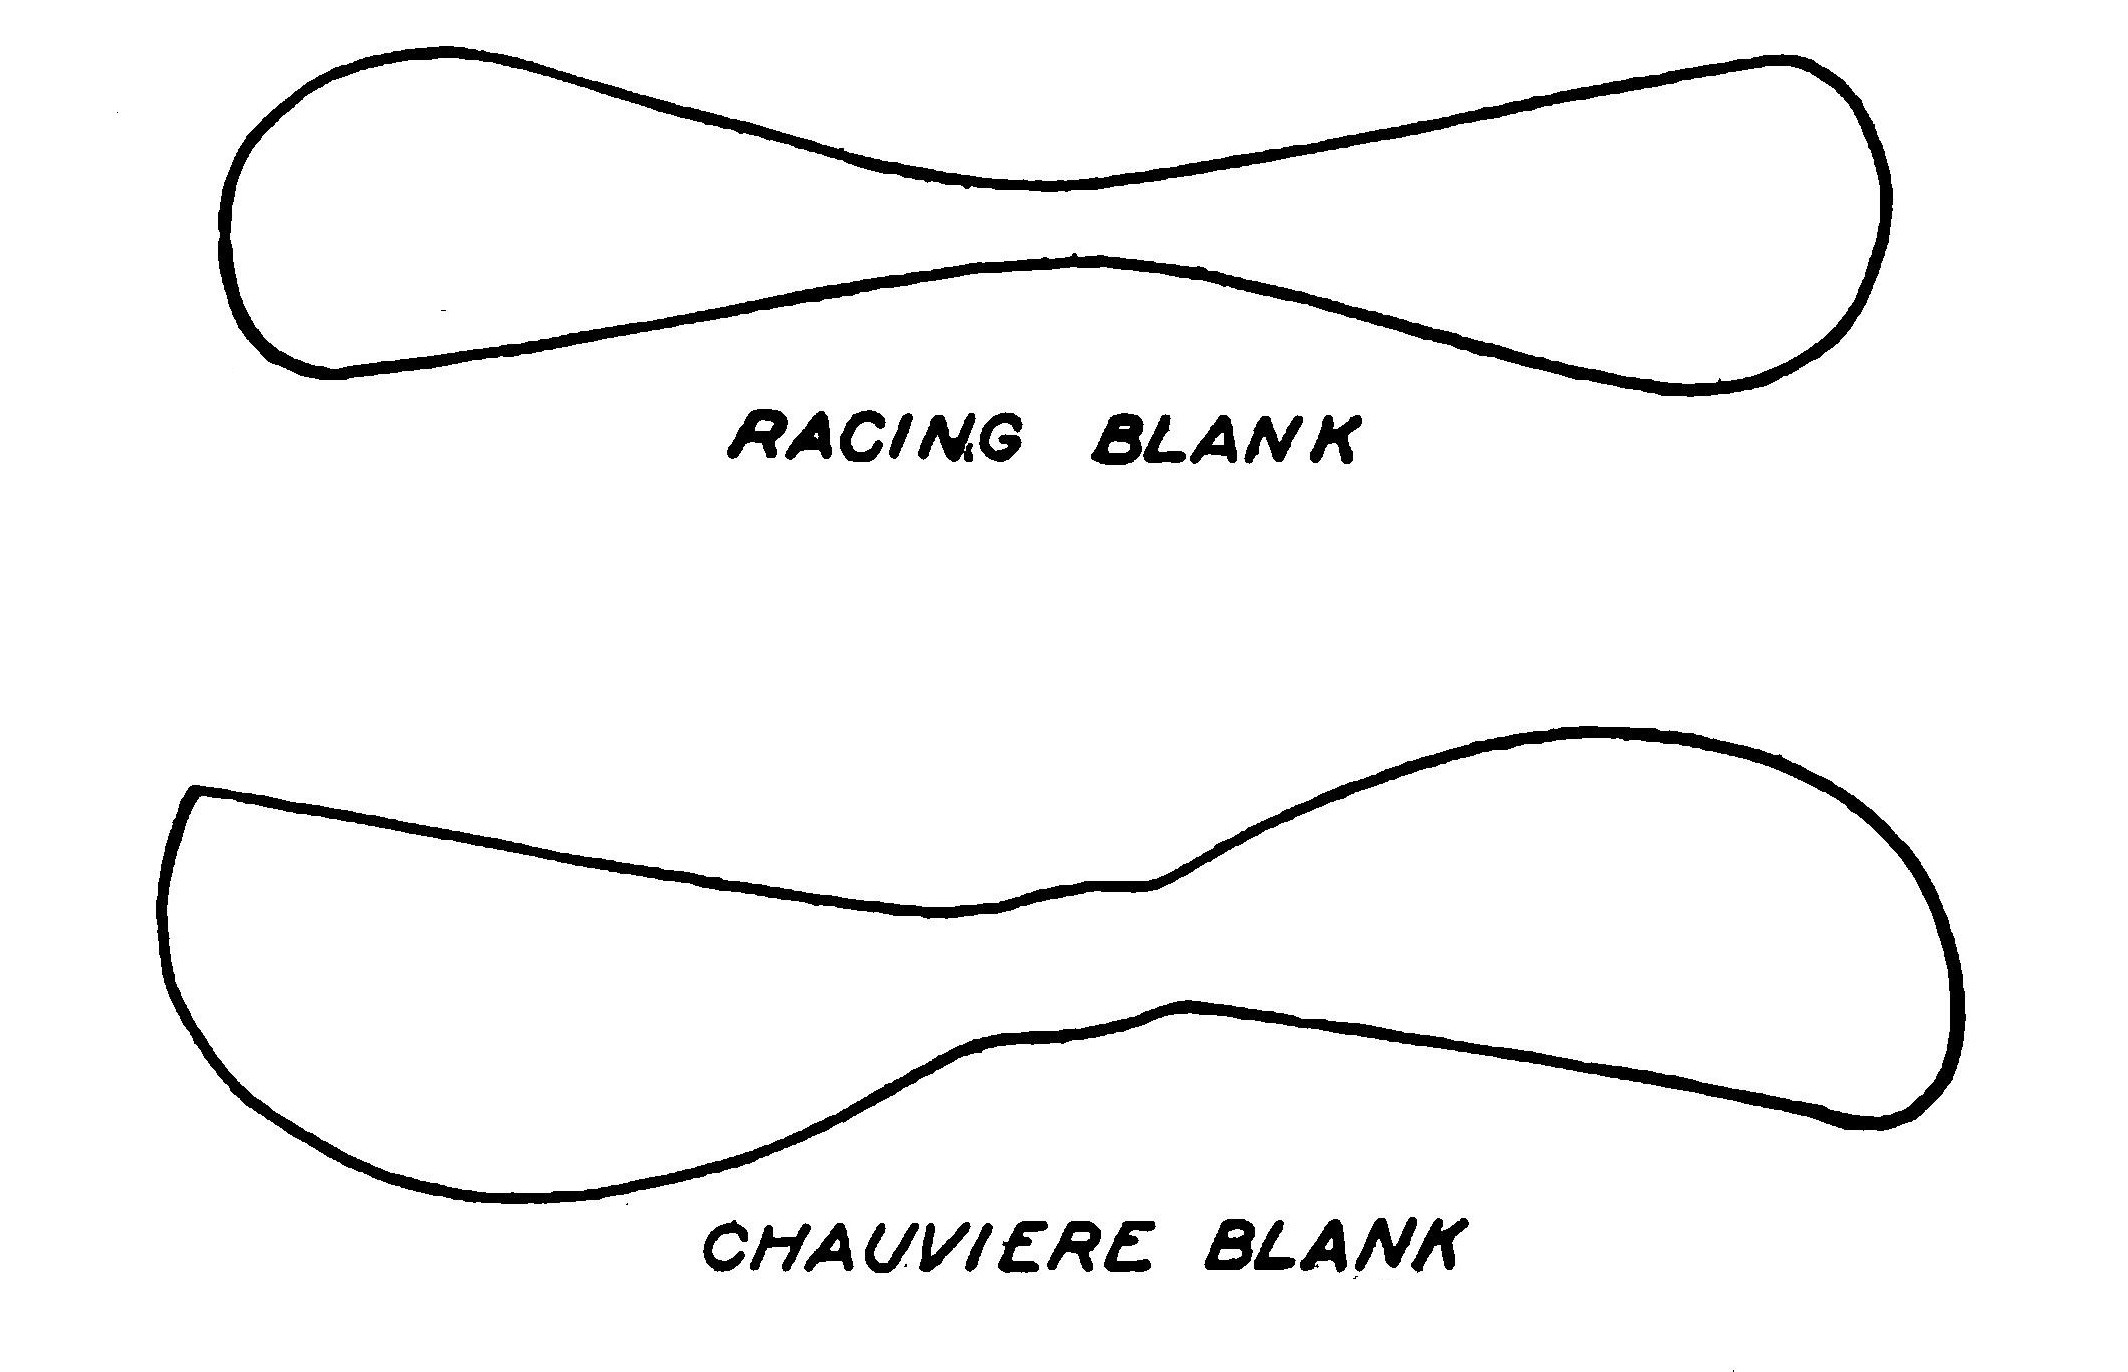 FIG. 39. Blanks for racing (top) and chauviere (bottom) propellers.